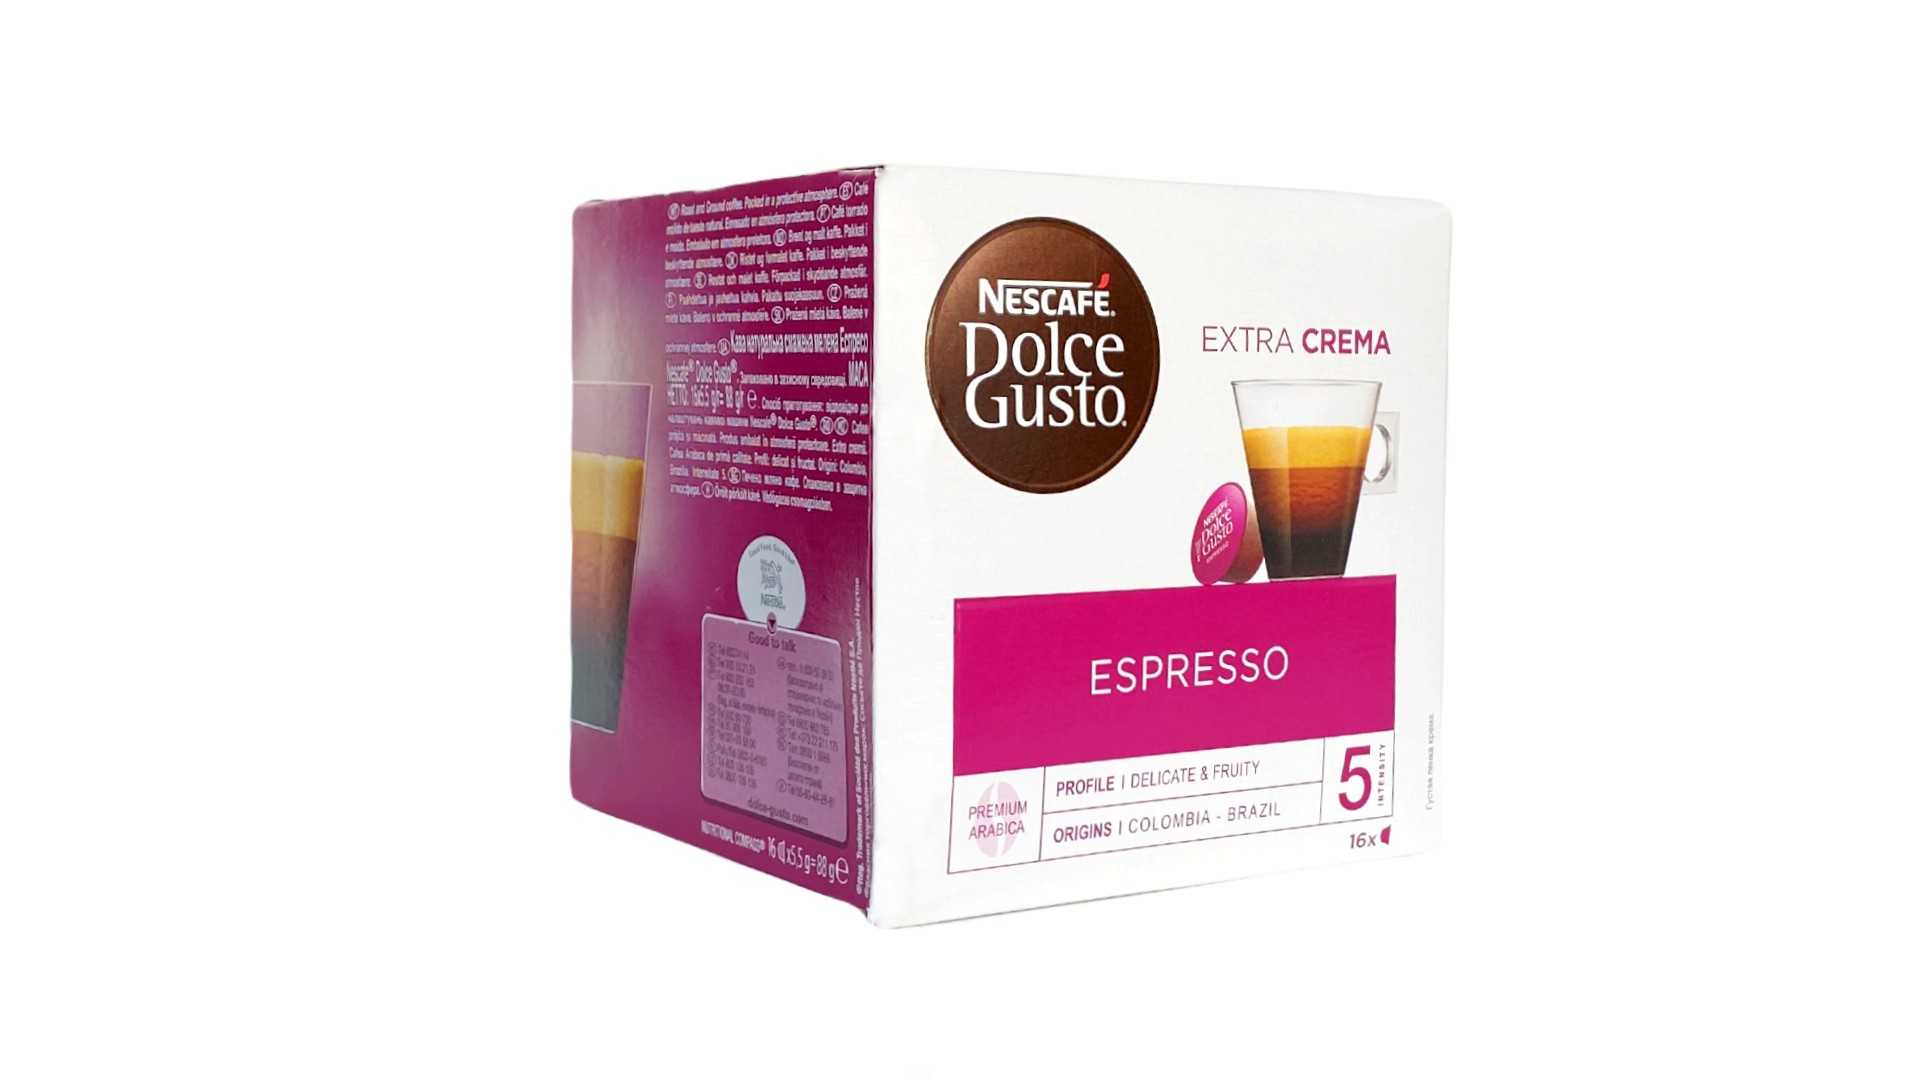 Espresso dolce. Espresso intenso капсулы Dolce gusto. "Cellini" капсулы для Dolce gusto Espresso deciso. Lebo Expresso dolche gusto. Дольче густо kr 230.